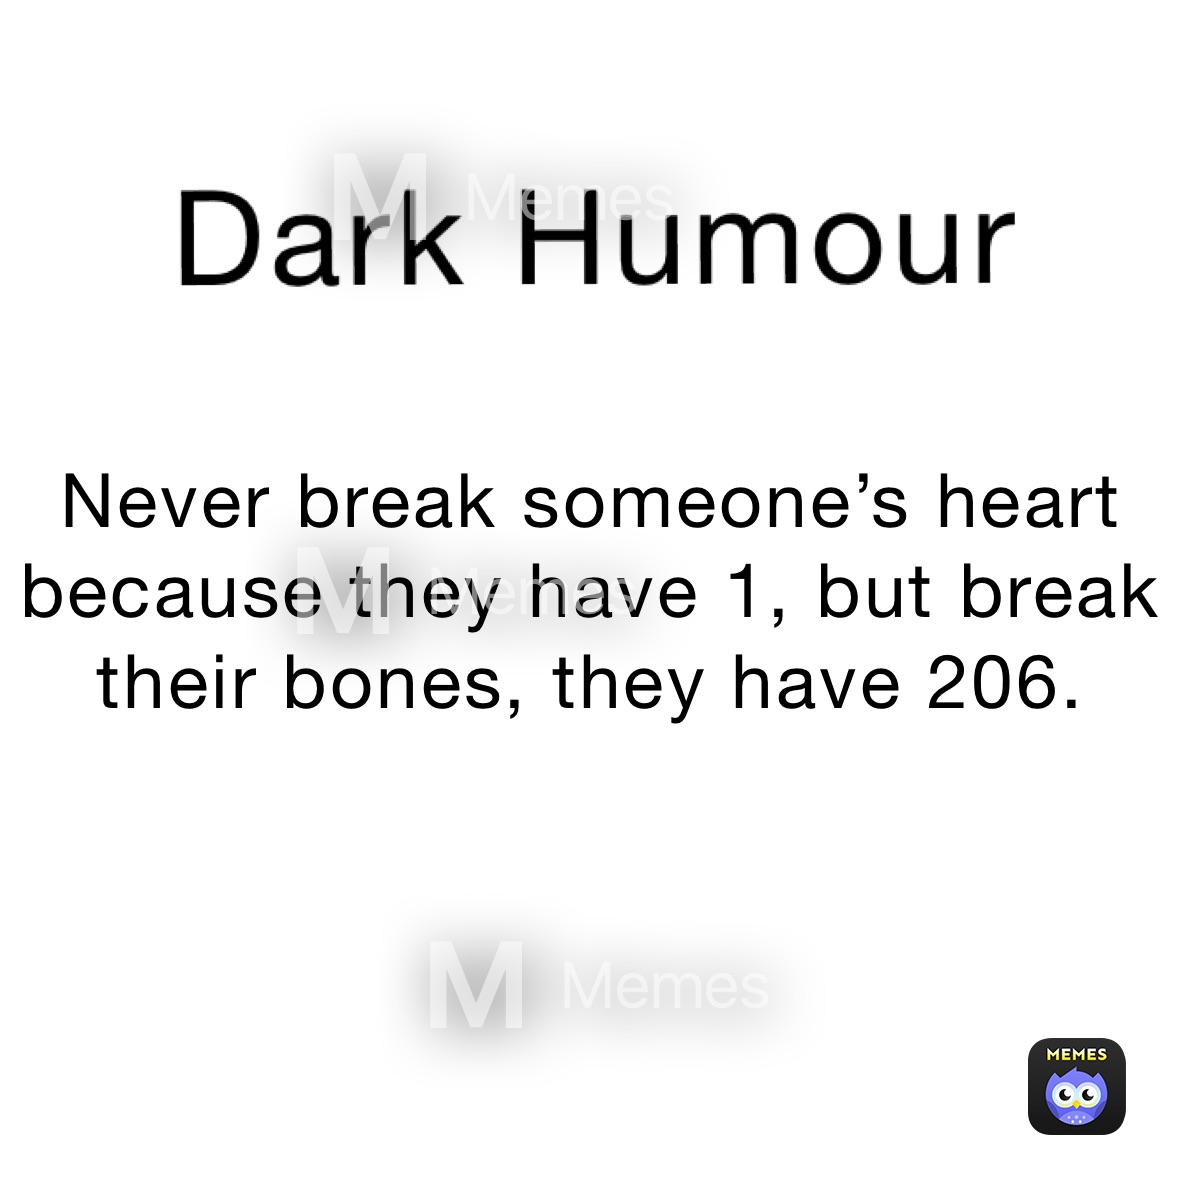 Never break someone’s heart because they have 1, but break their bones, they have 206.